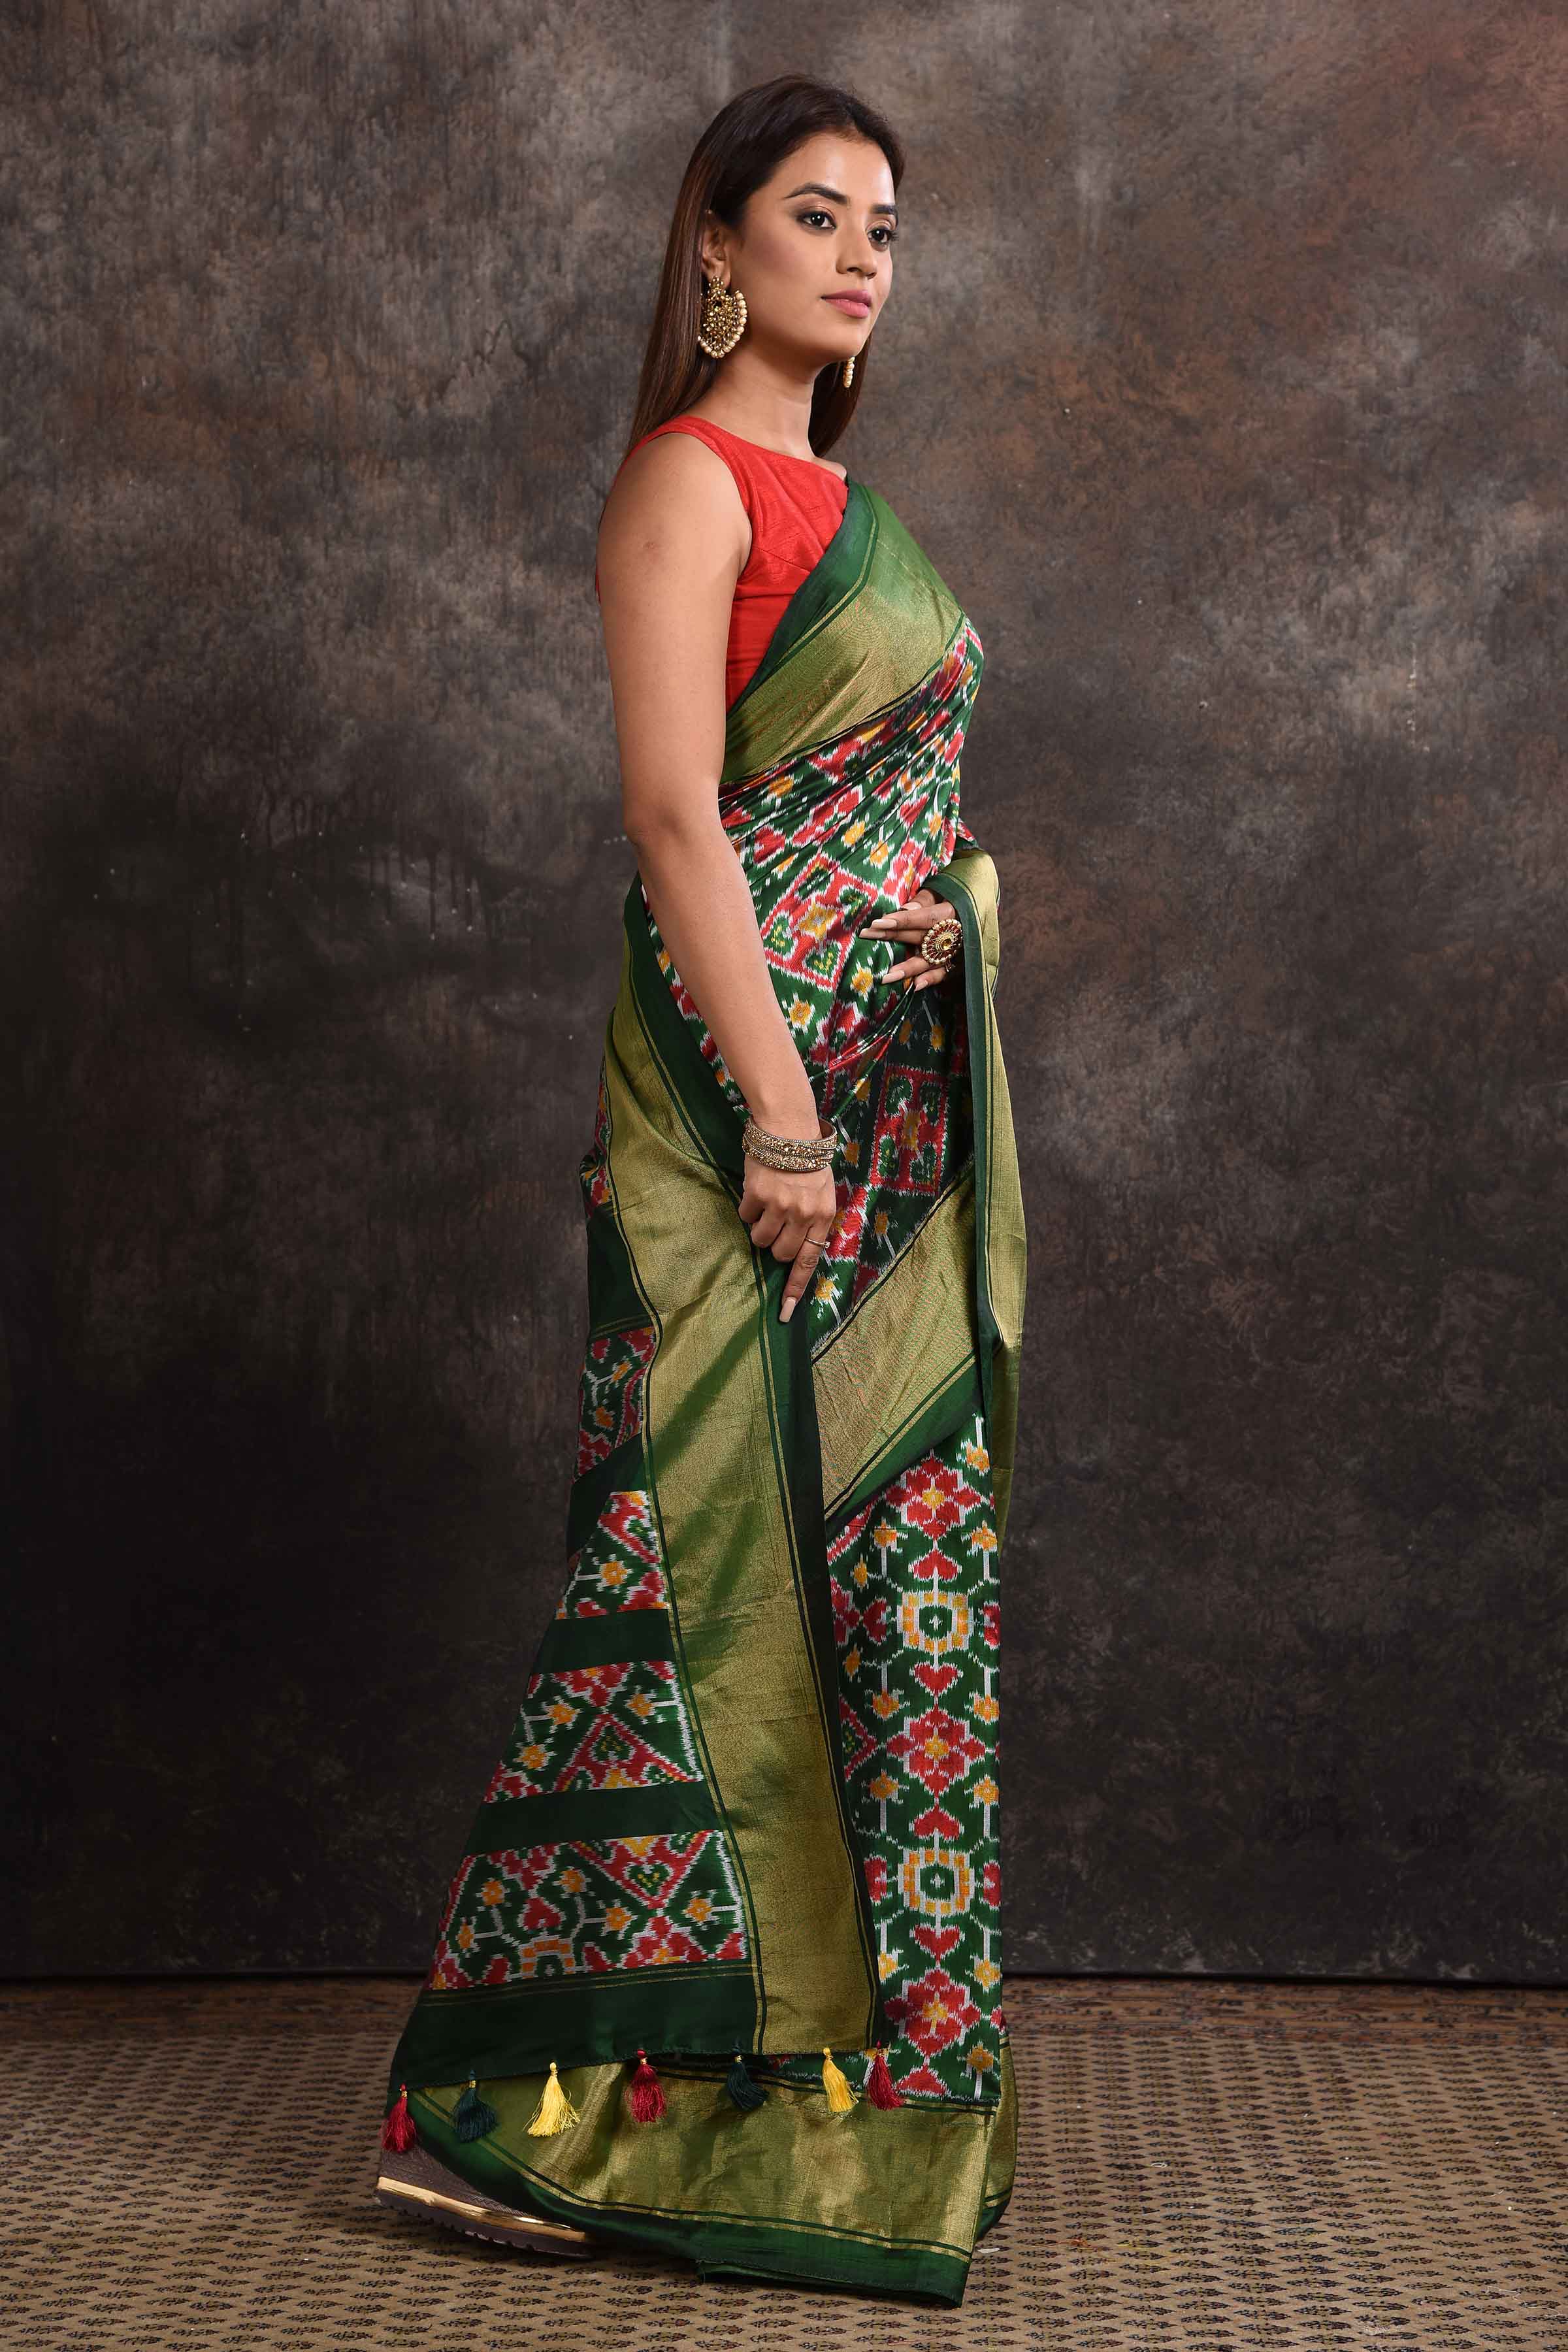 Buy stunning bottle green ikkat silk saree online in USA with zari border. Look your ethnic best on festive occasions with latest designer sarees, pure silk sarees, Kanchipuram silk sarees, handwoven sarees, tussar silk sarees, embroidered sarees from Pure Elegance Indian saree store in USA.-side